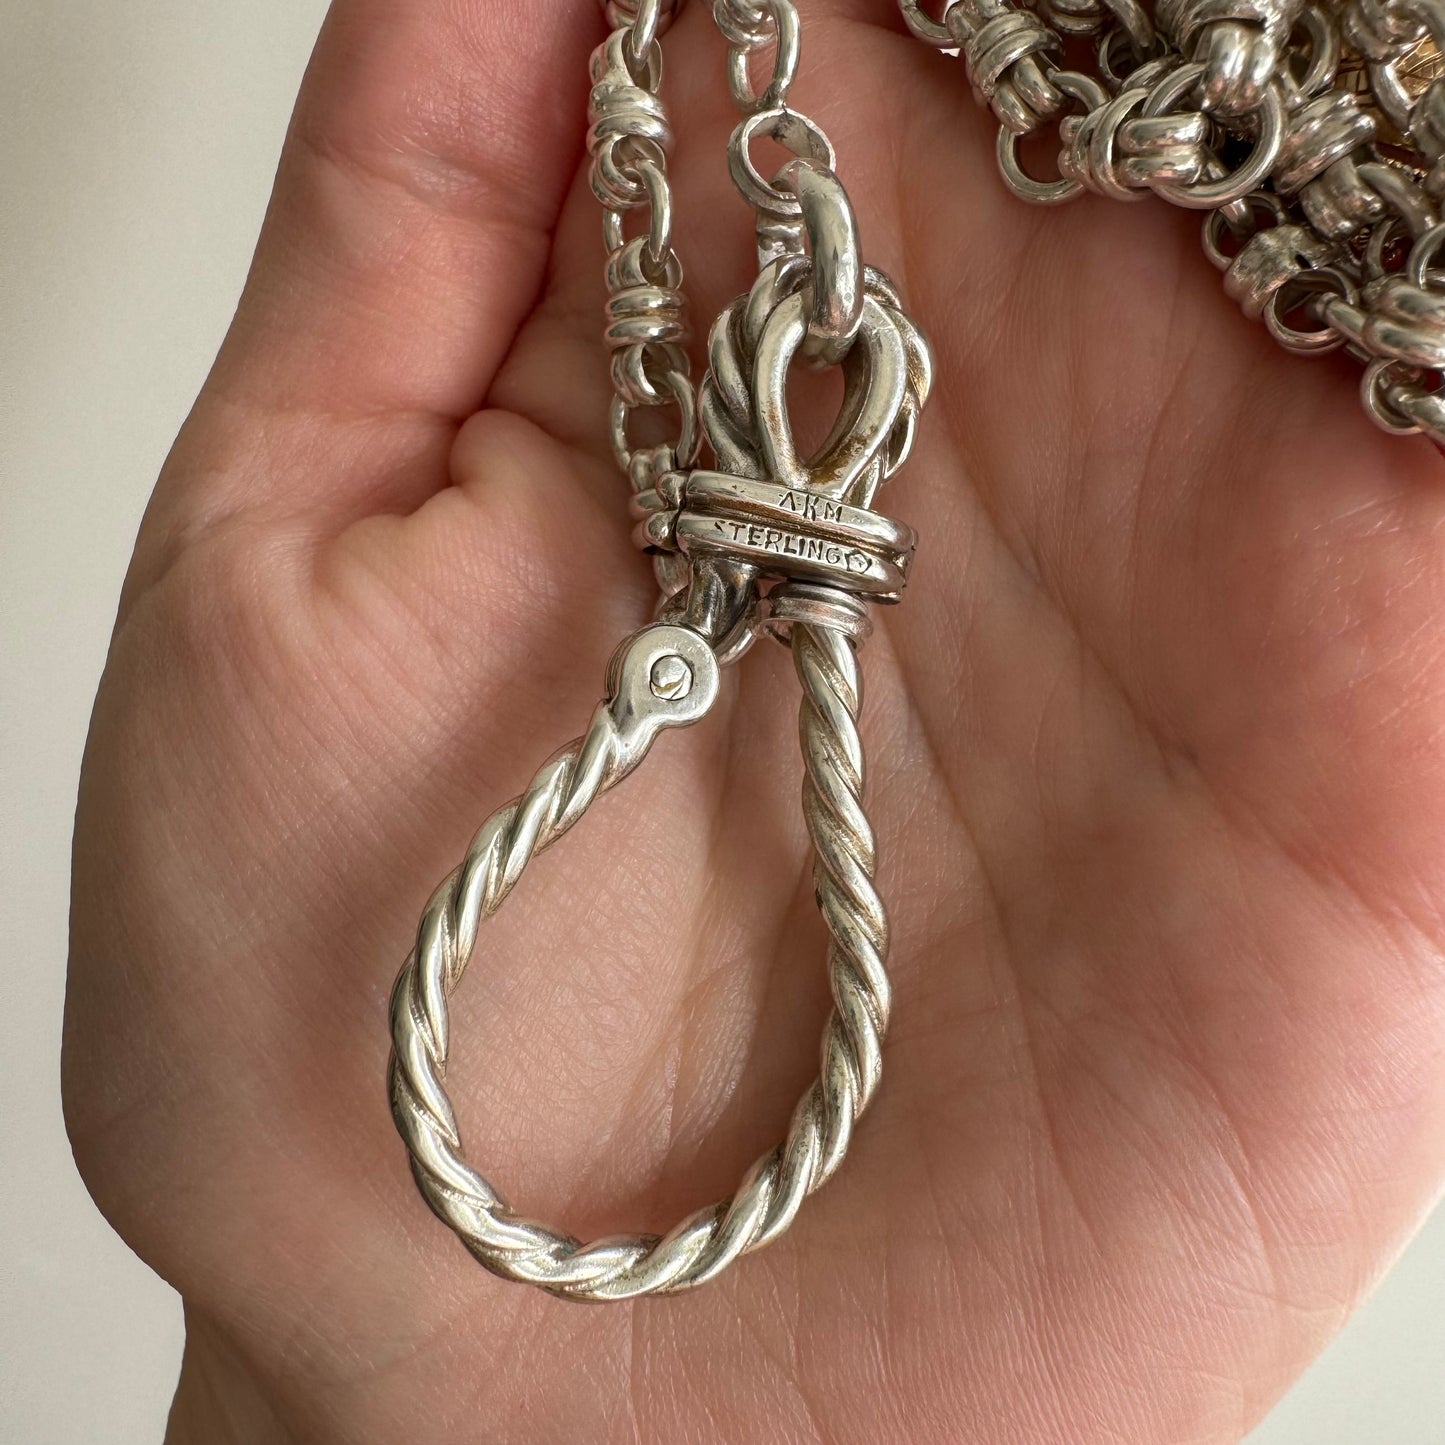 reimagined V I N T A G E // twisted connector / sterling silver fancy link chain with twisted carabiner pendant holder / ~26", 45g